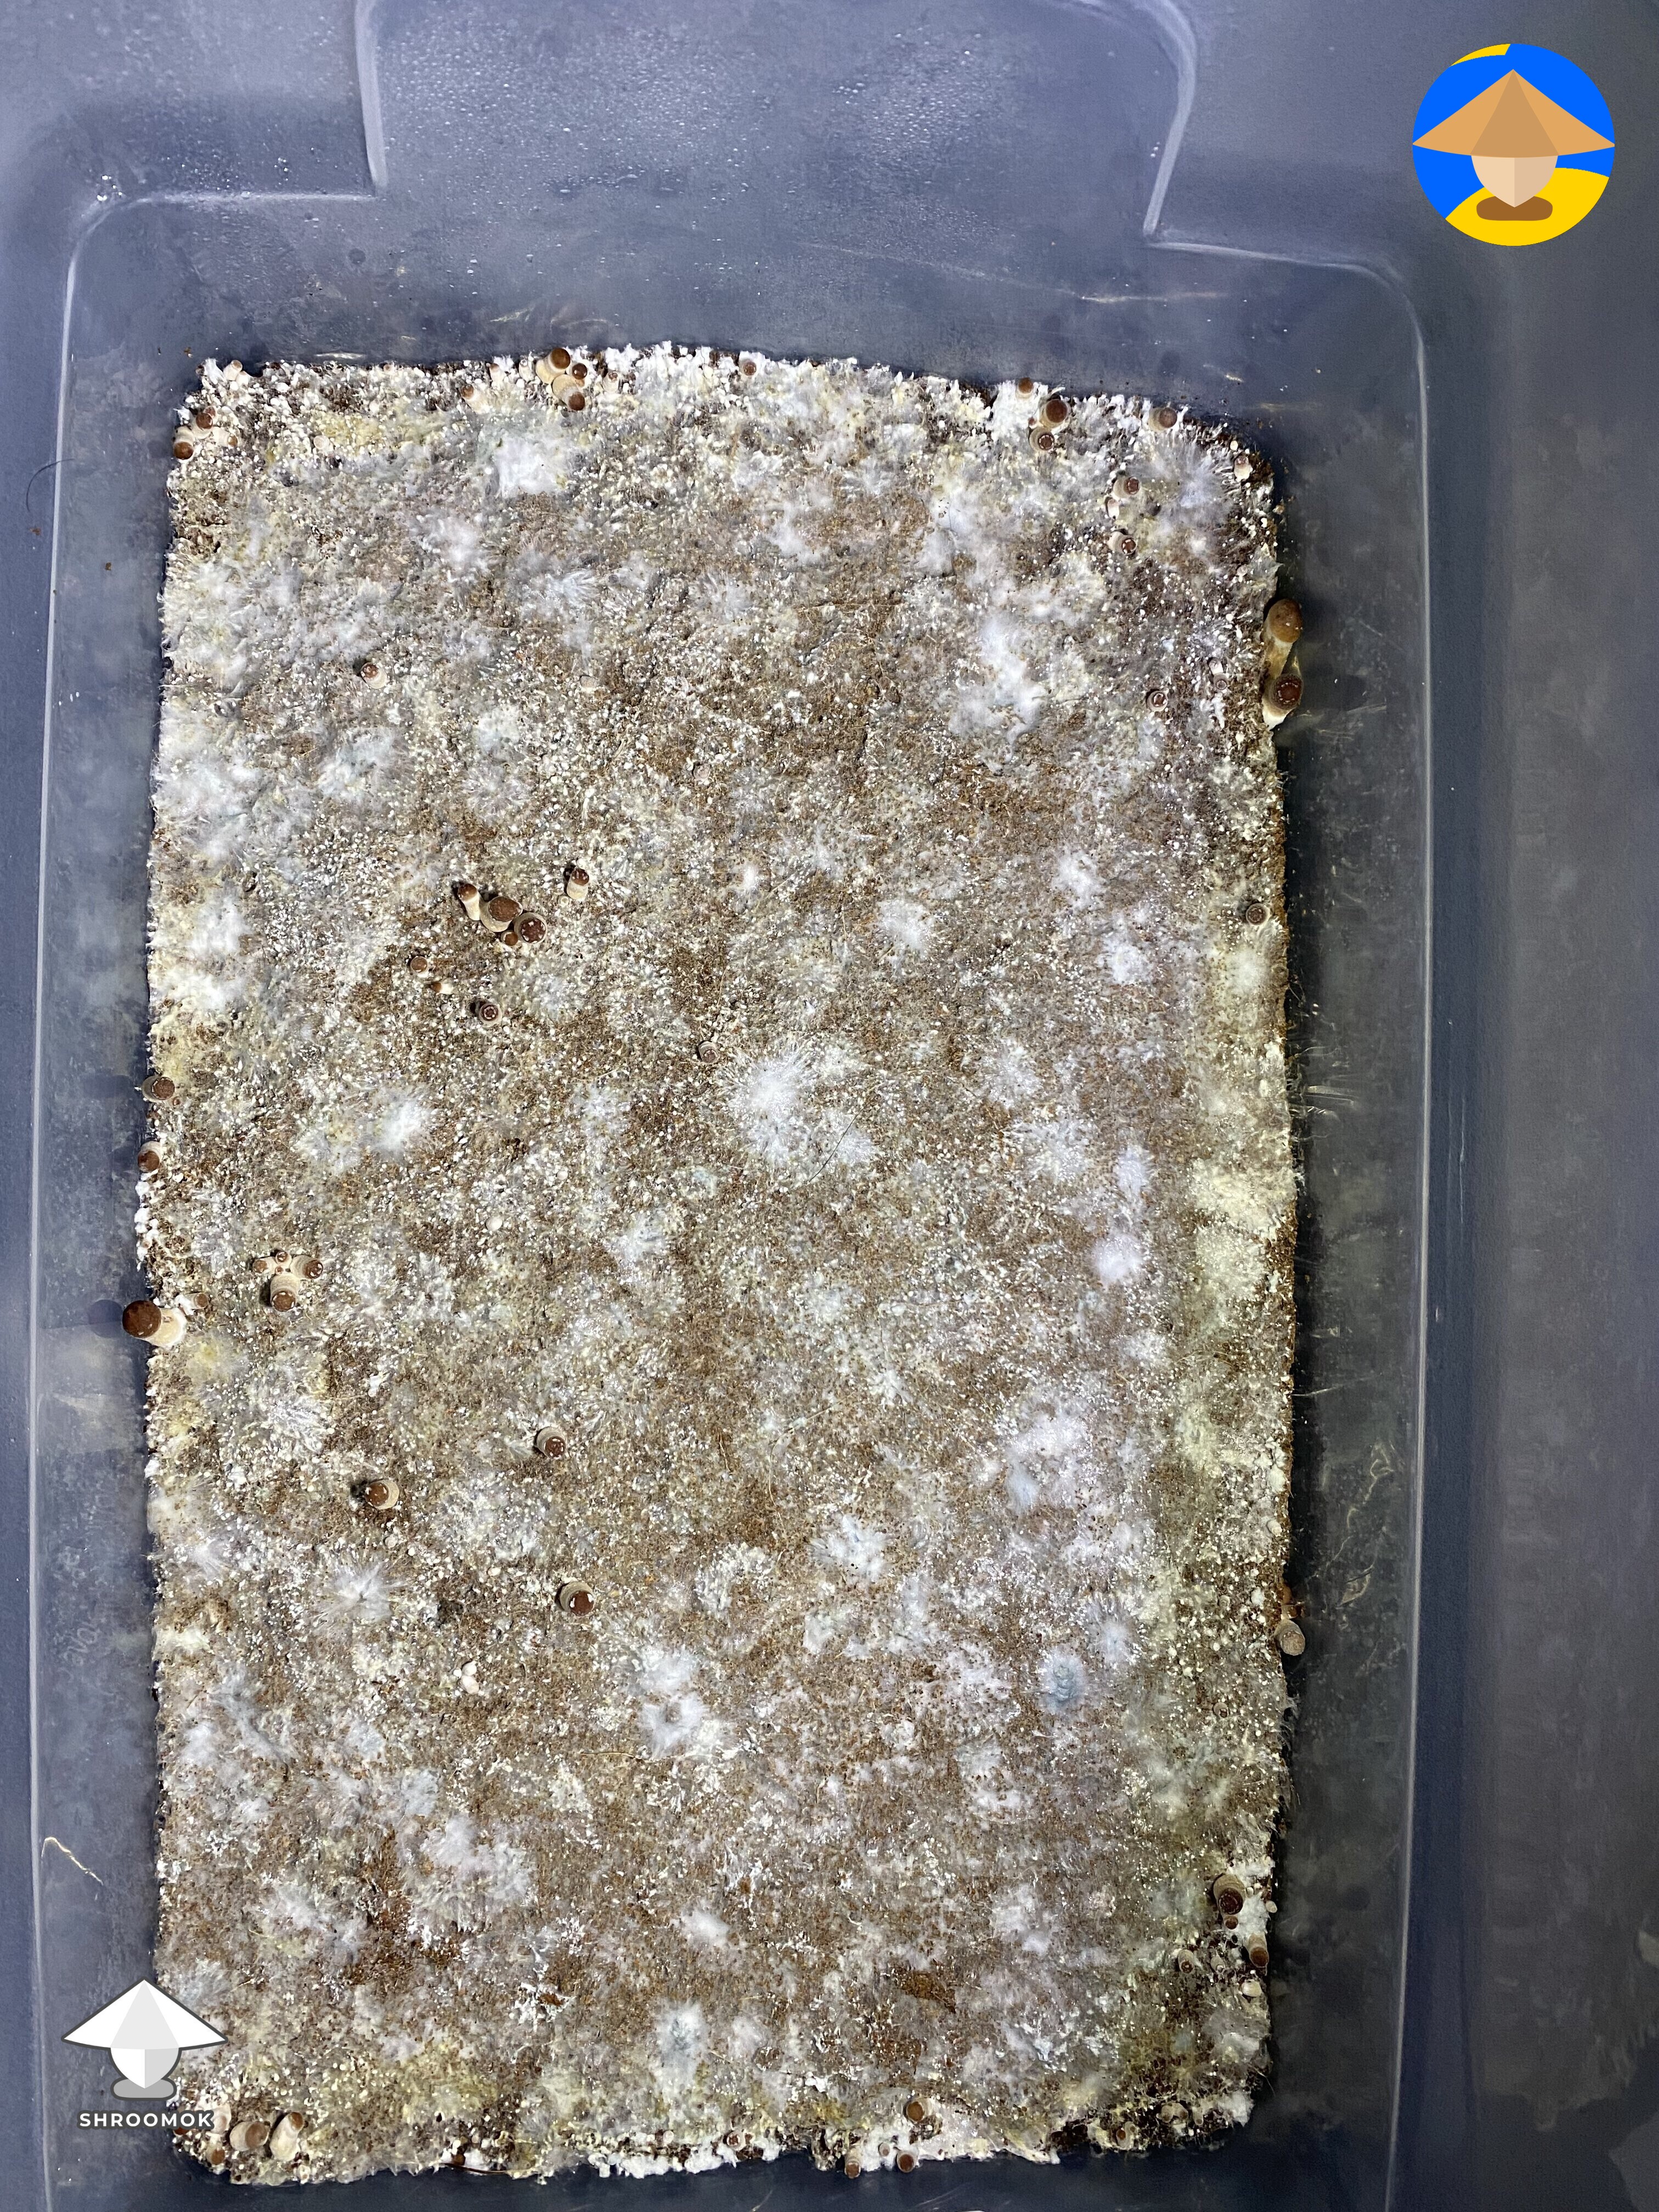 What’s going on here? Yellow spots on mycelium